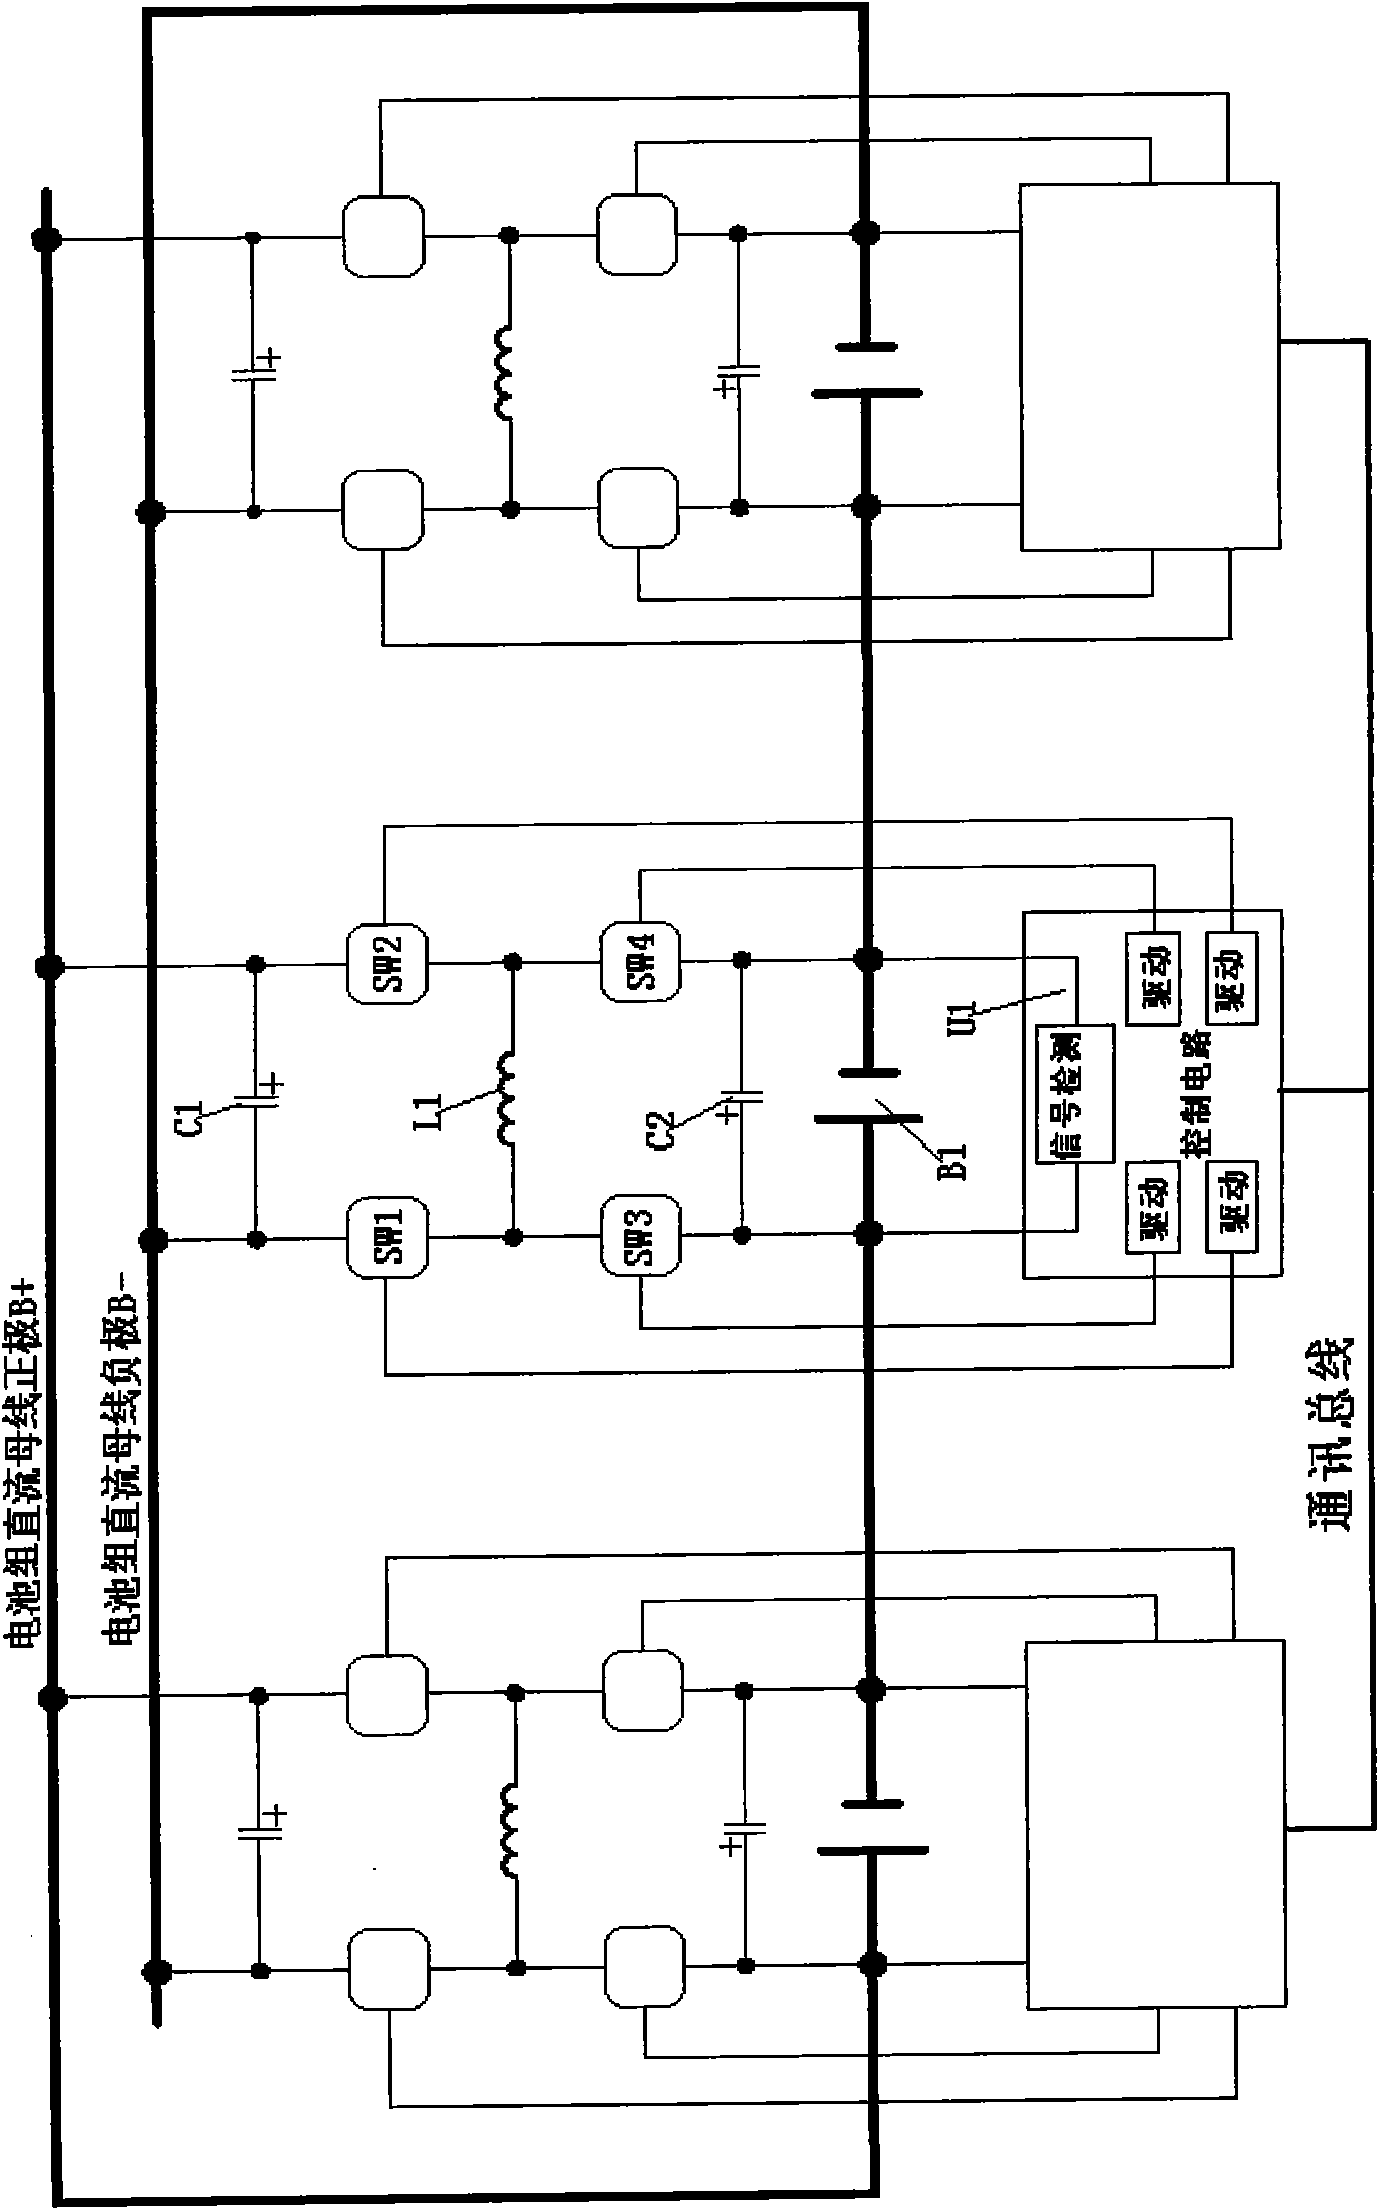 Direct current step-up/step-down circuit